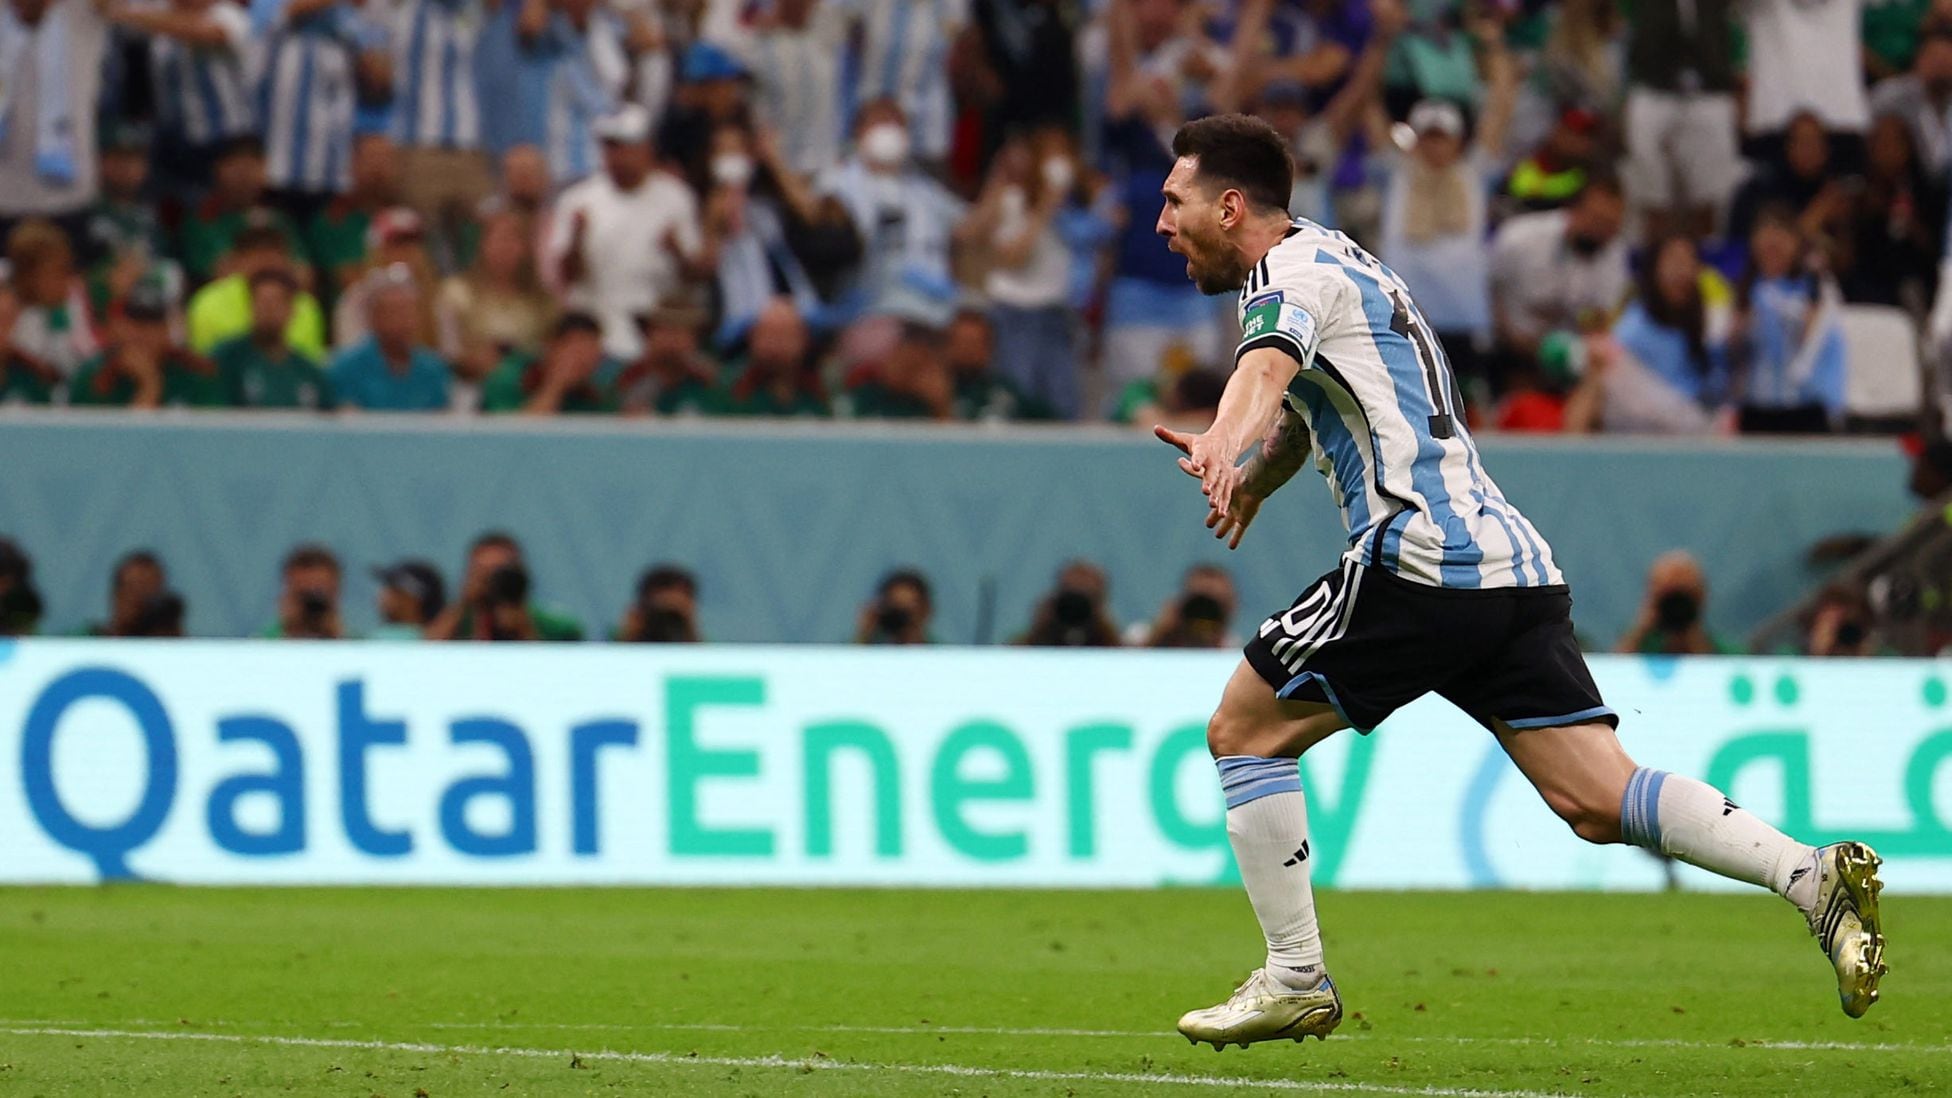 Argentina - Mexico summary: Messi and Enzo goals, score, goals, highlights  2-0 | Qatar World Cup 2022 - AS USA